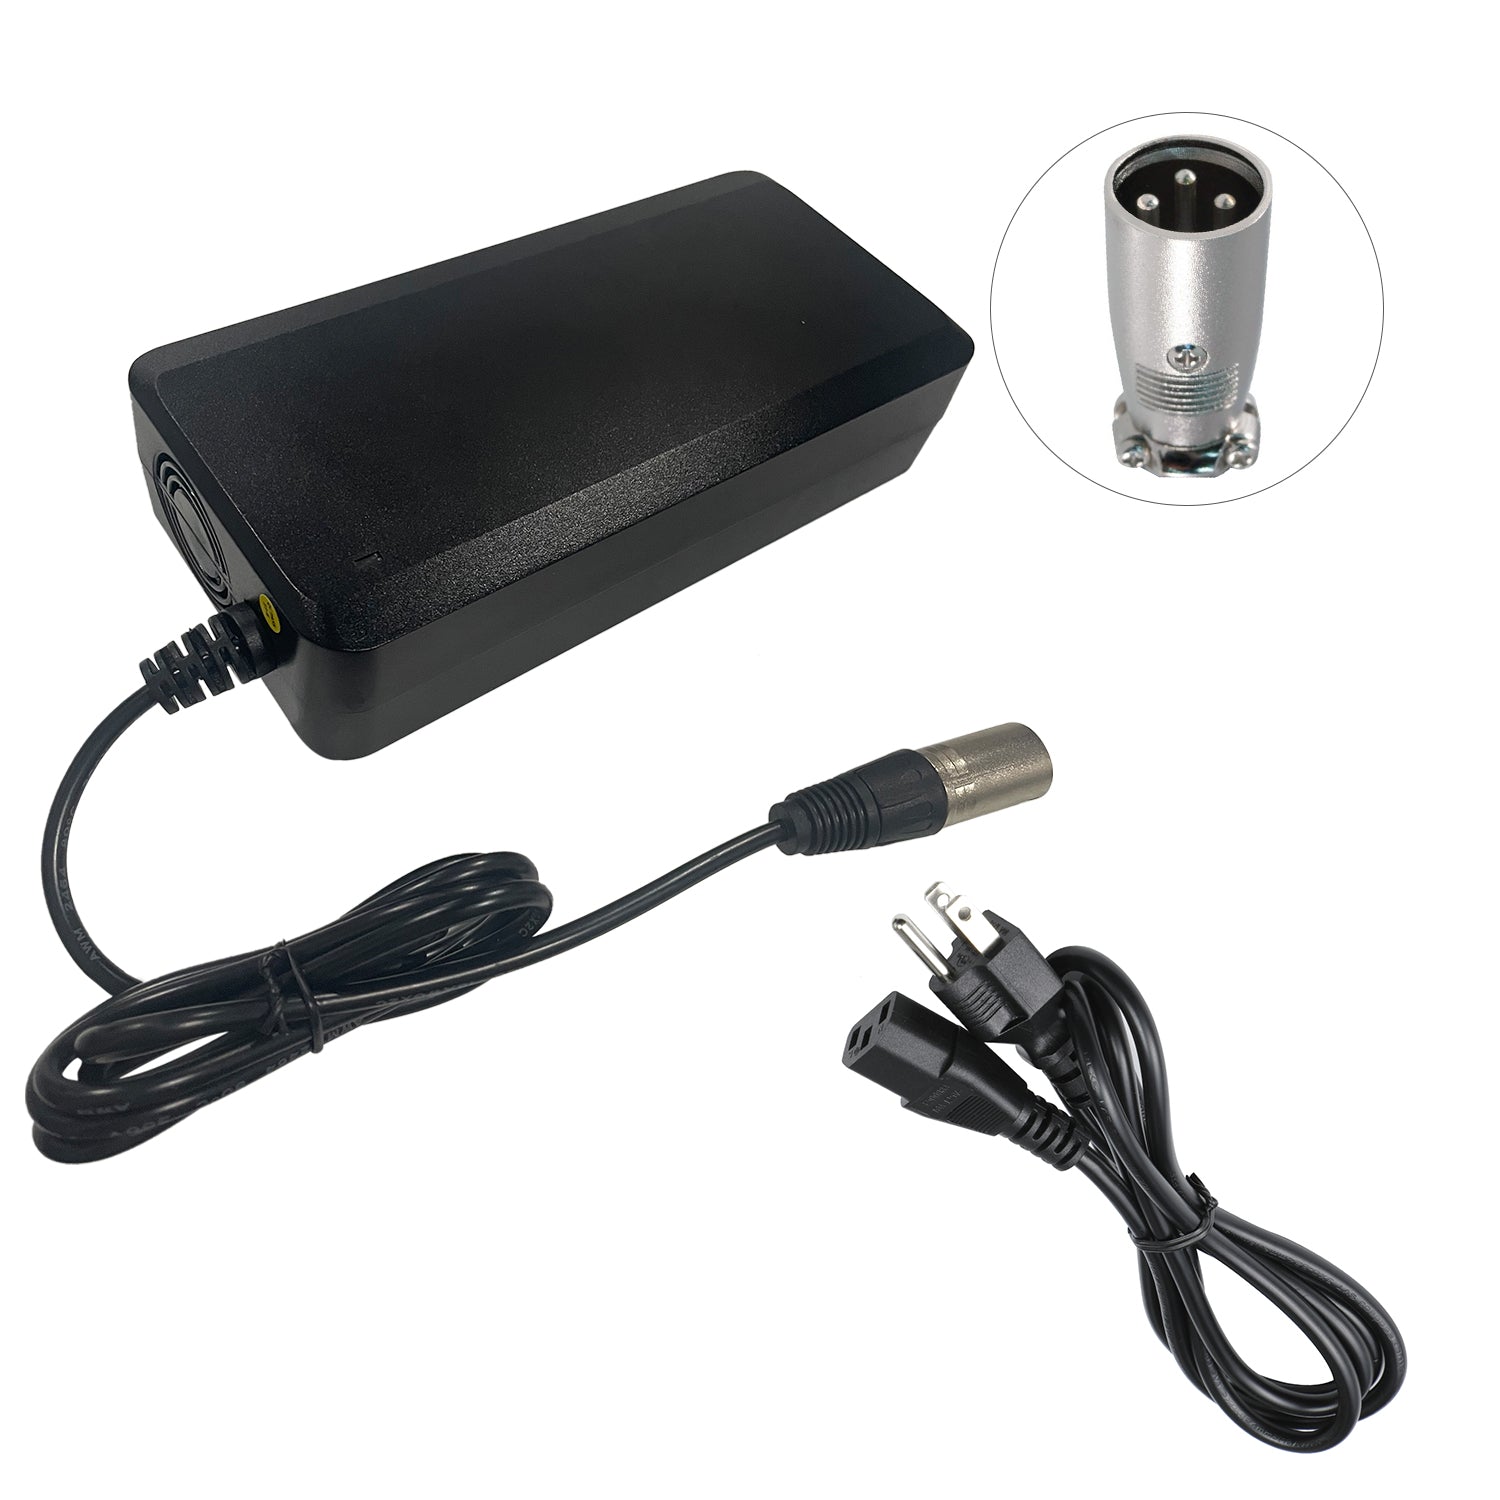 UL Listed 24V 8A Charger for Balder Liberty Power Chair